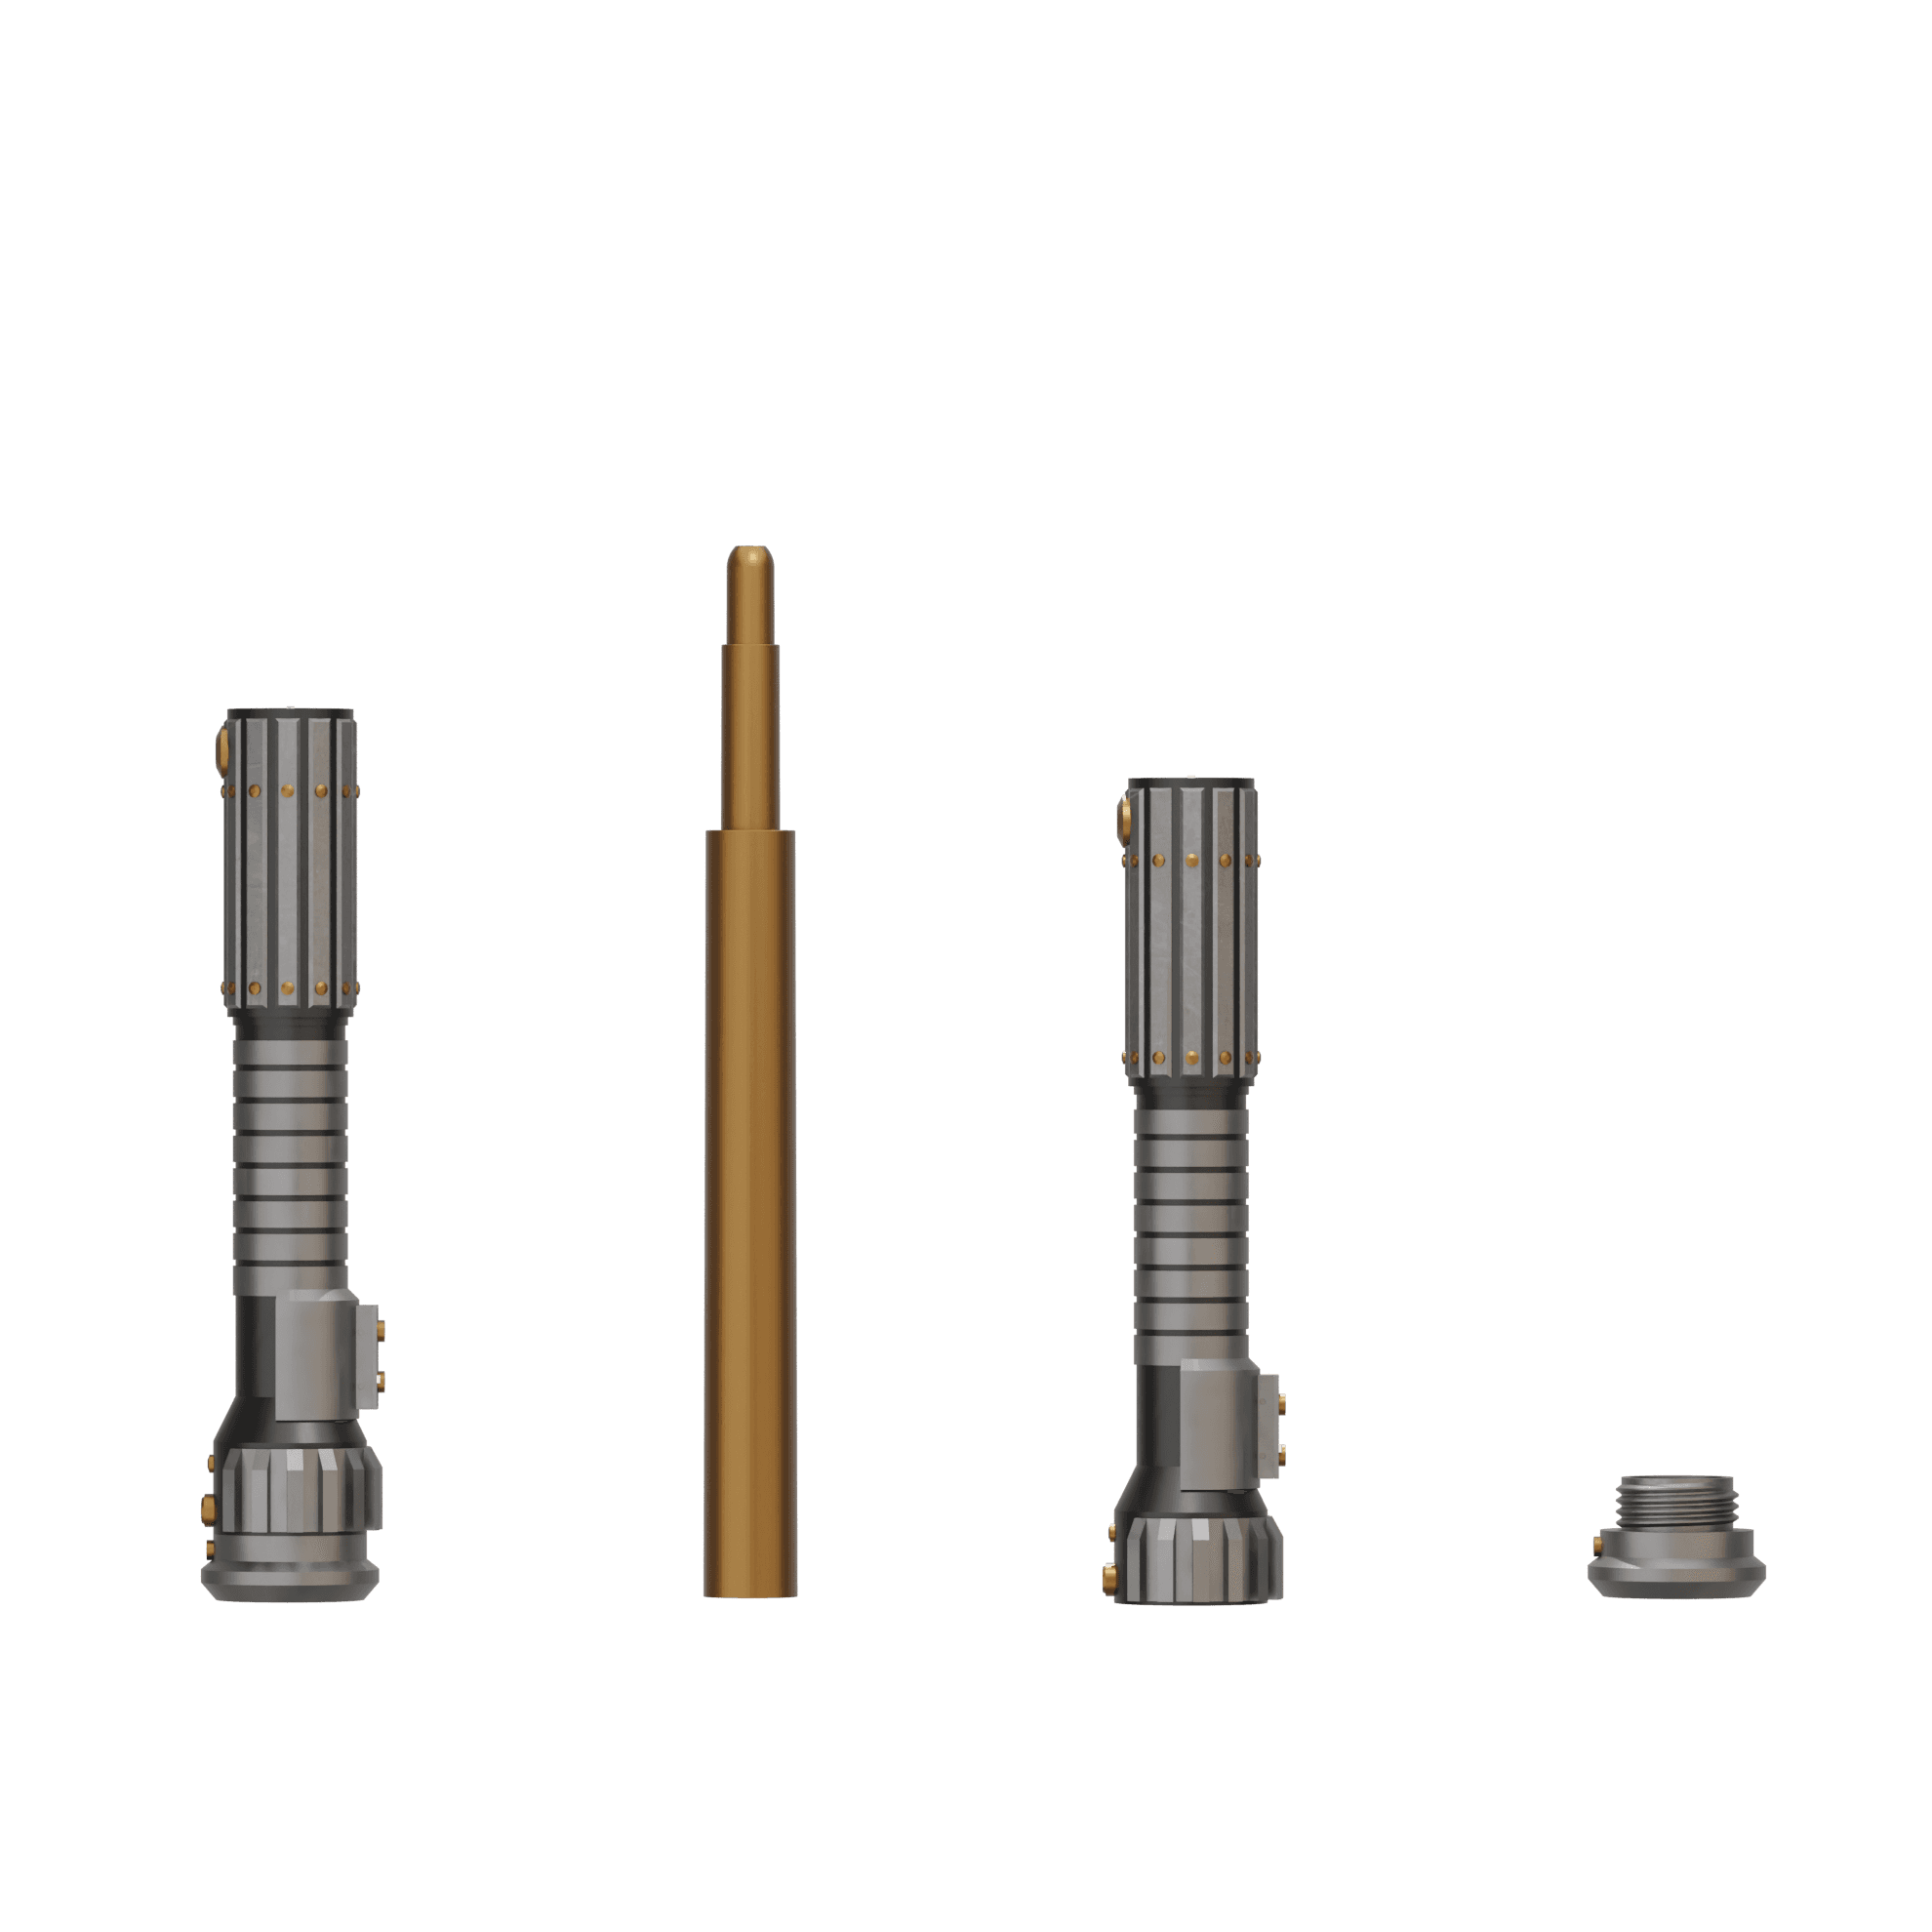 Print in Place Collapsing Jedi Lightsaber Concept 18 3d model